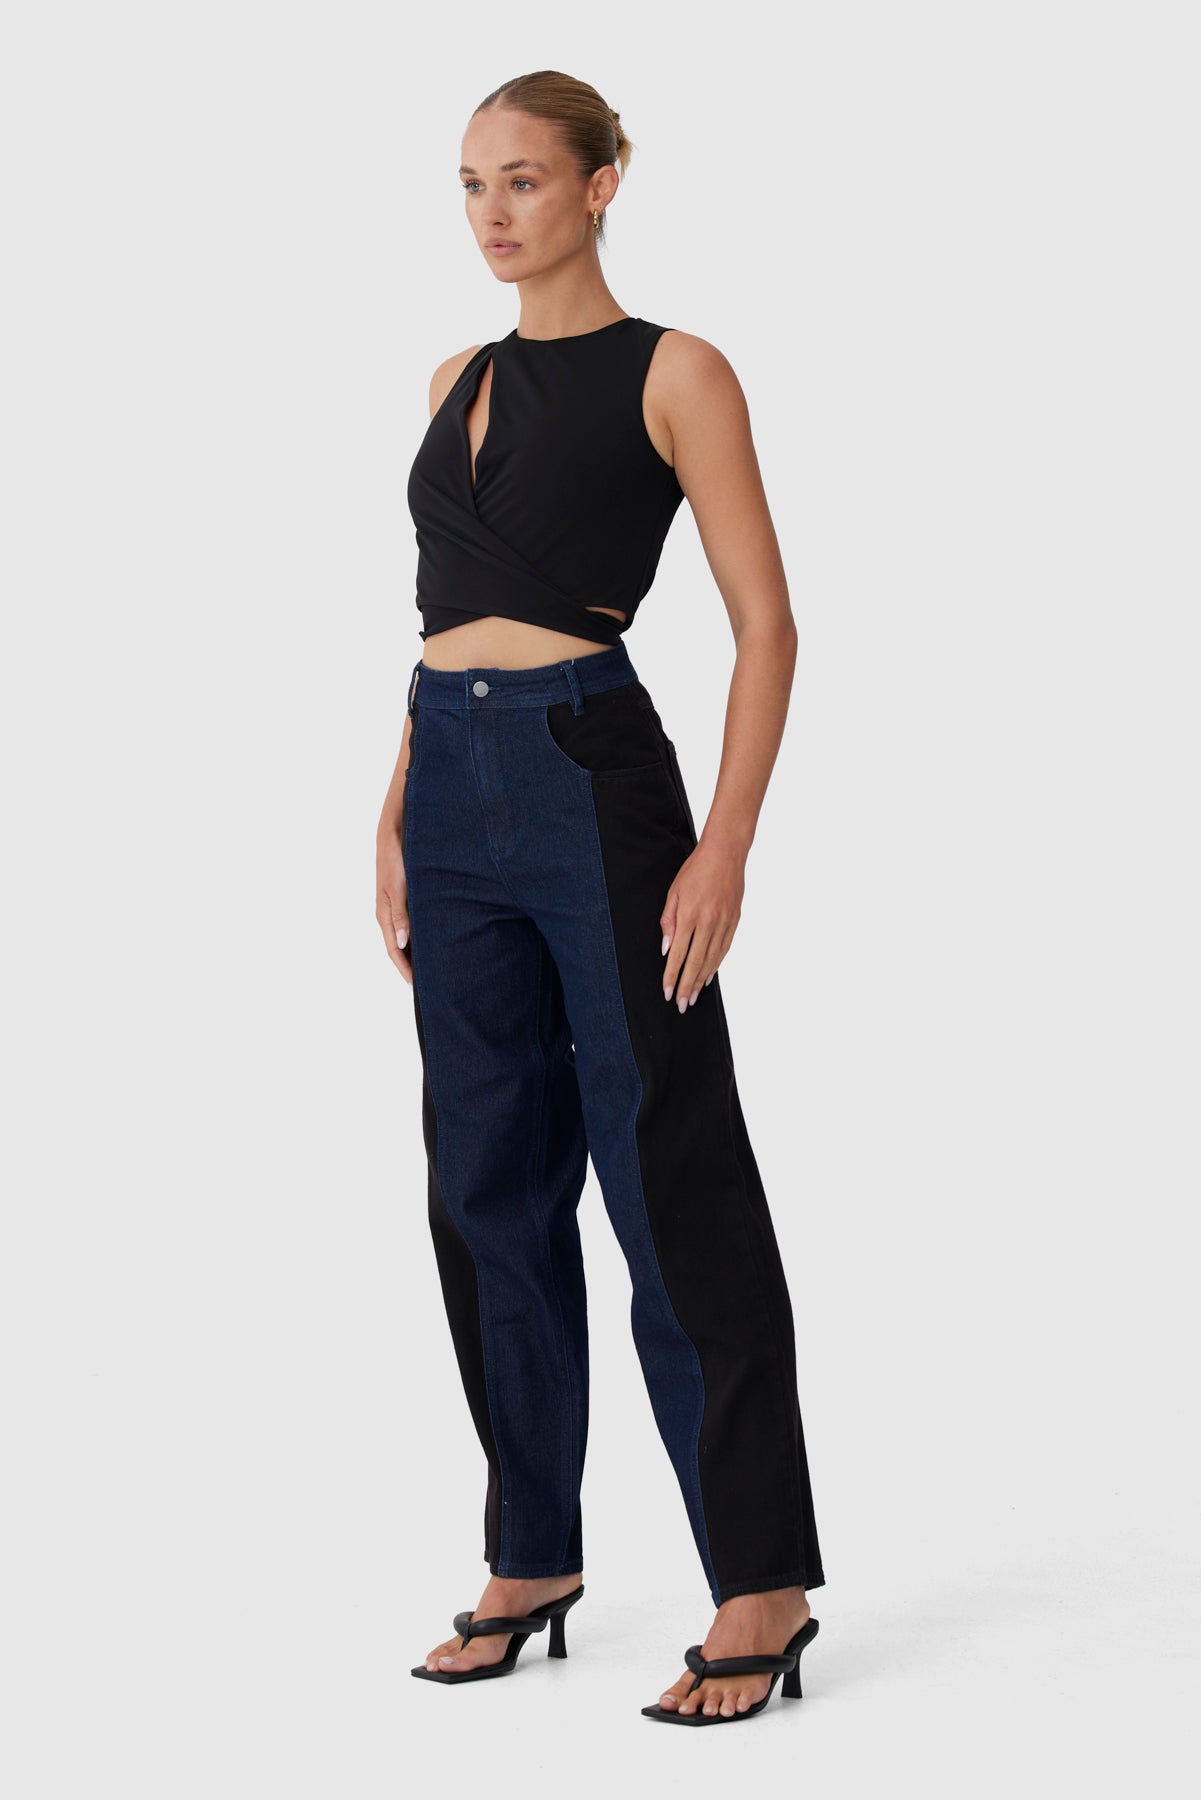 C/MEO Collective - Overpass Jeans - Indigo And Black